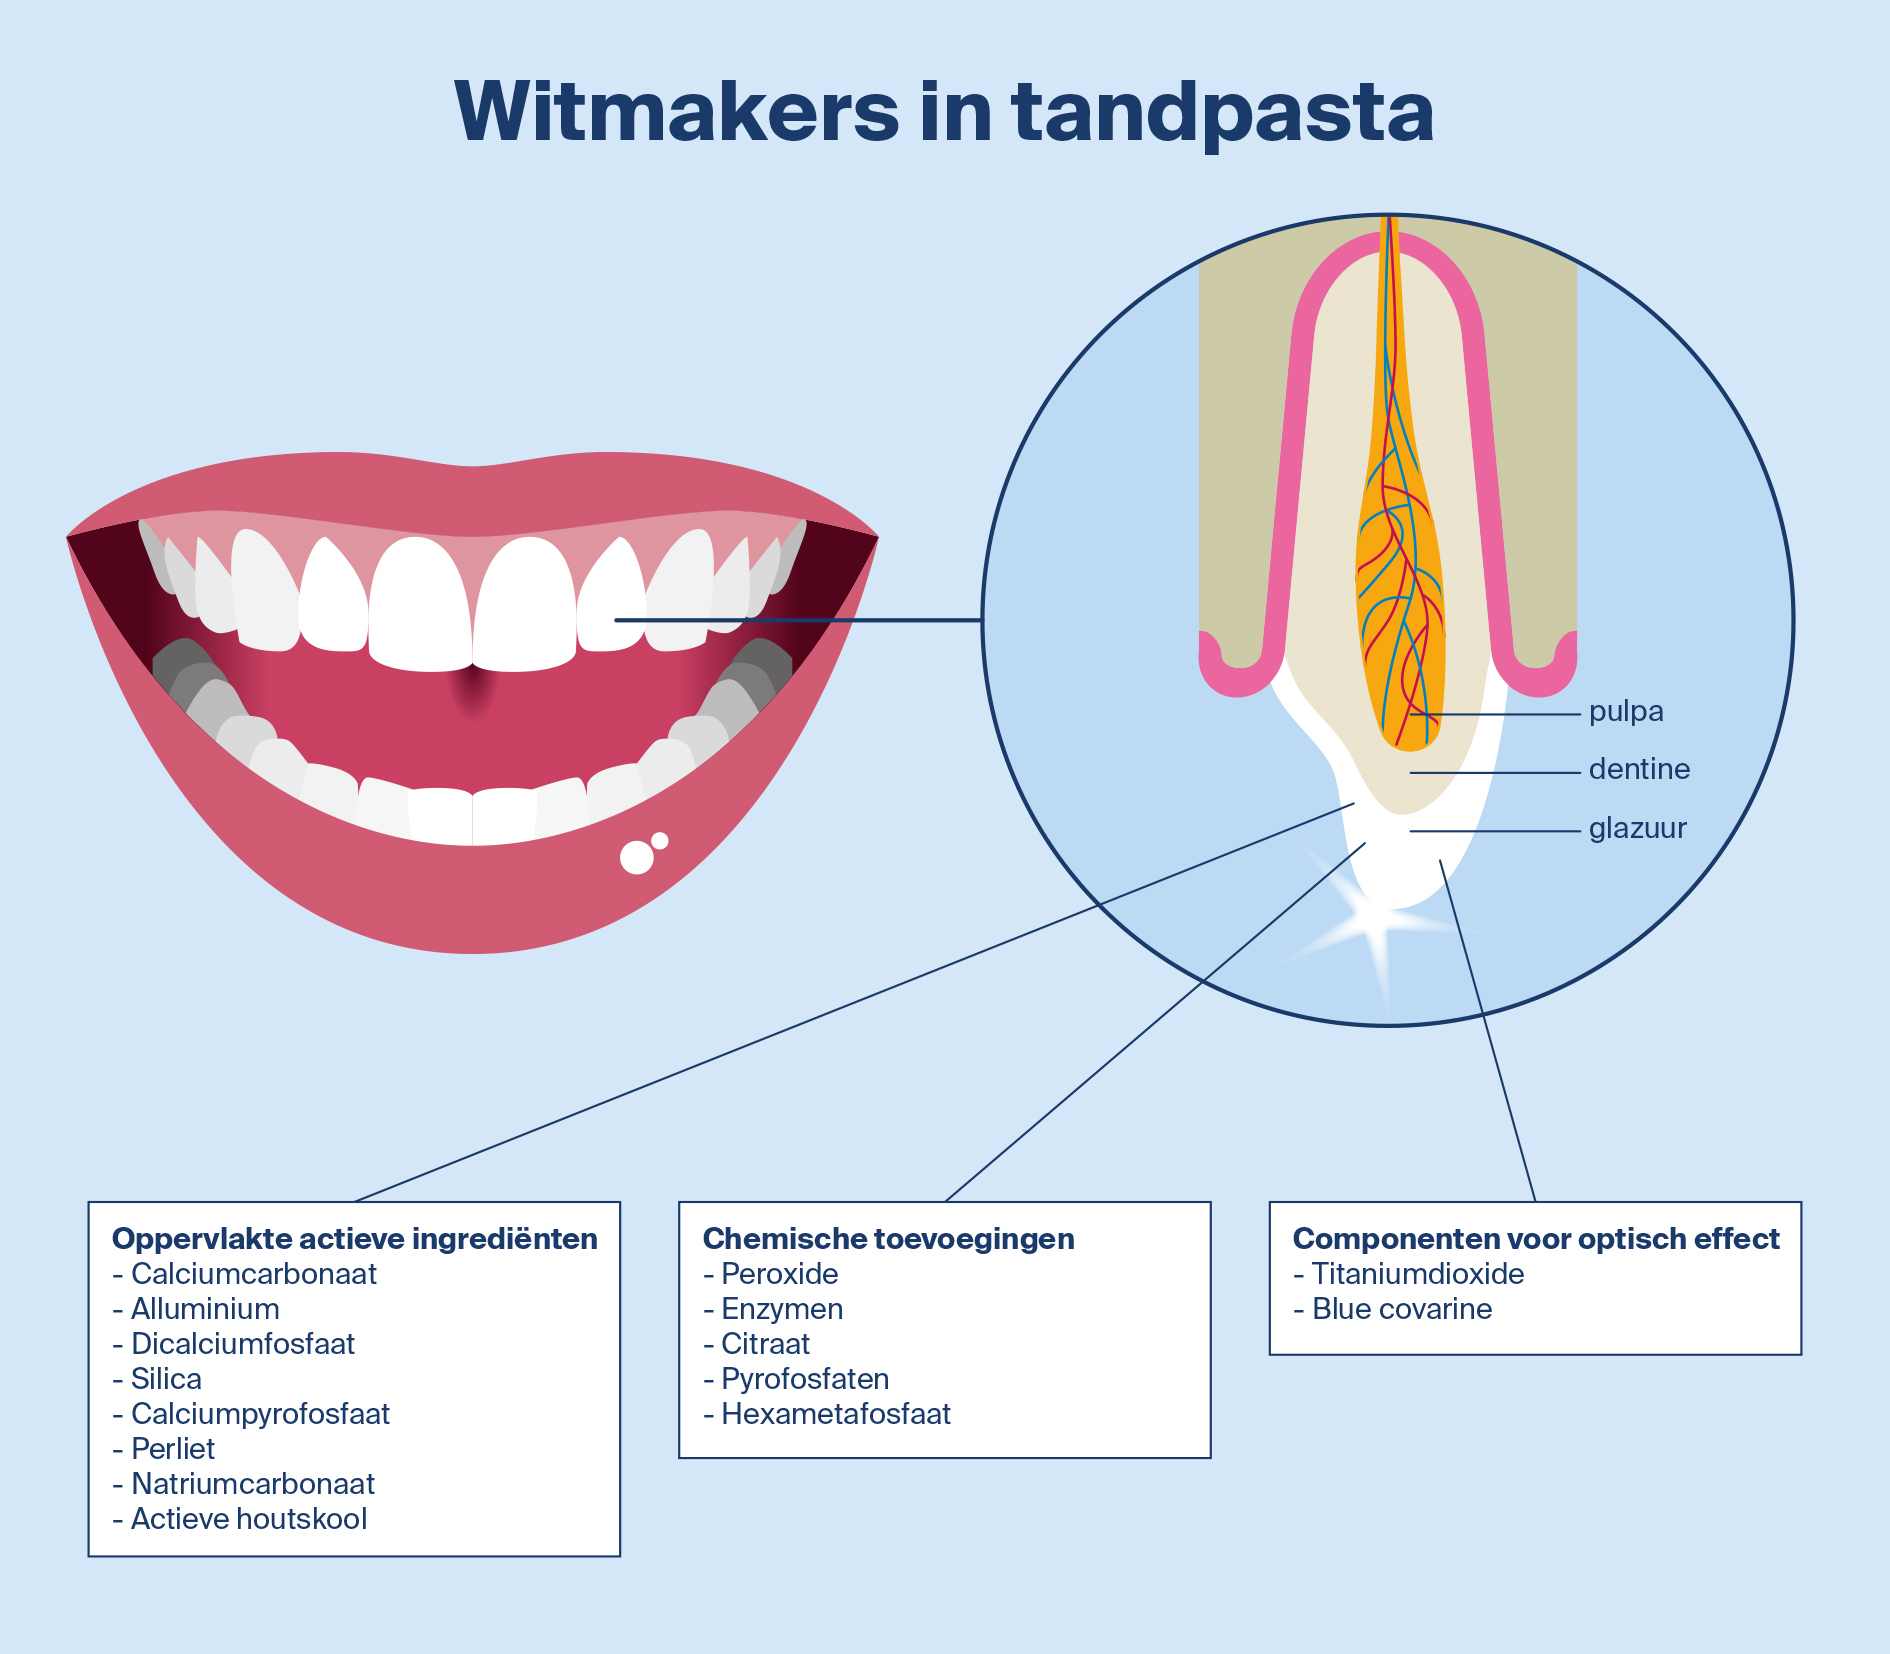 Witmakers in tandpasta 